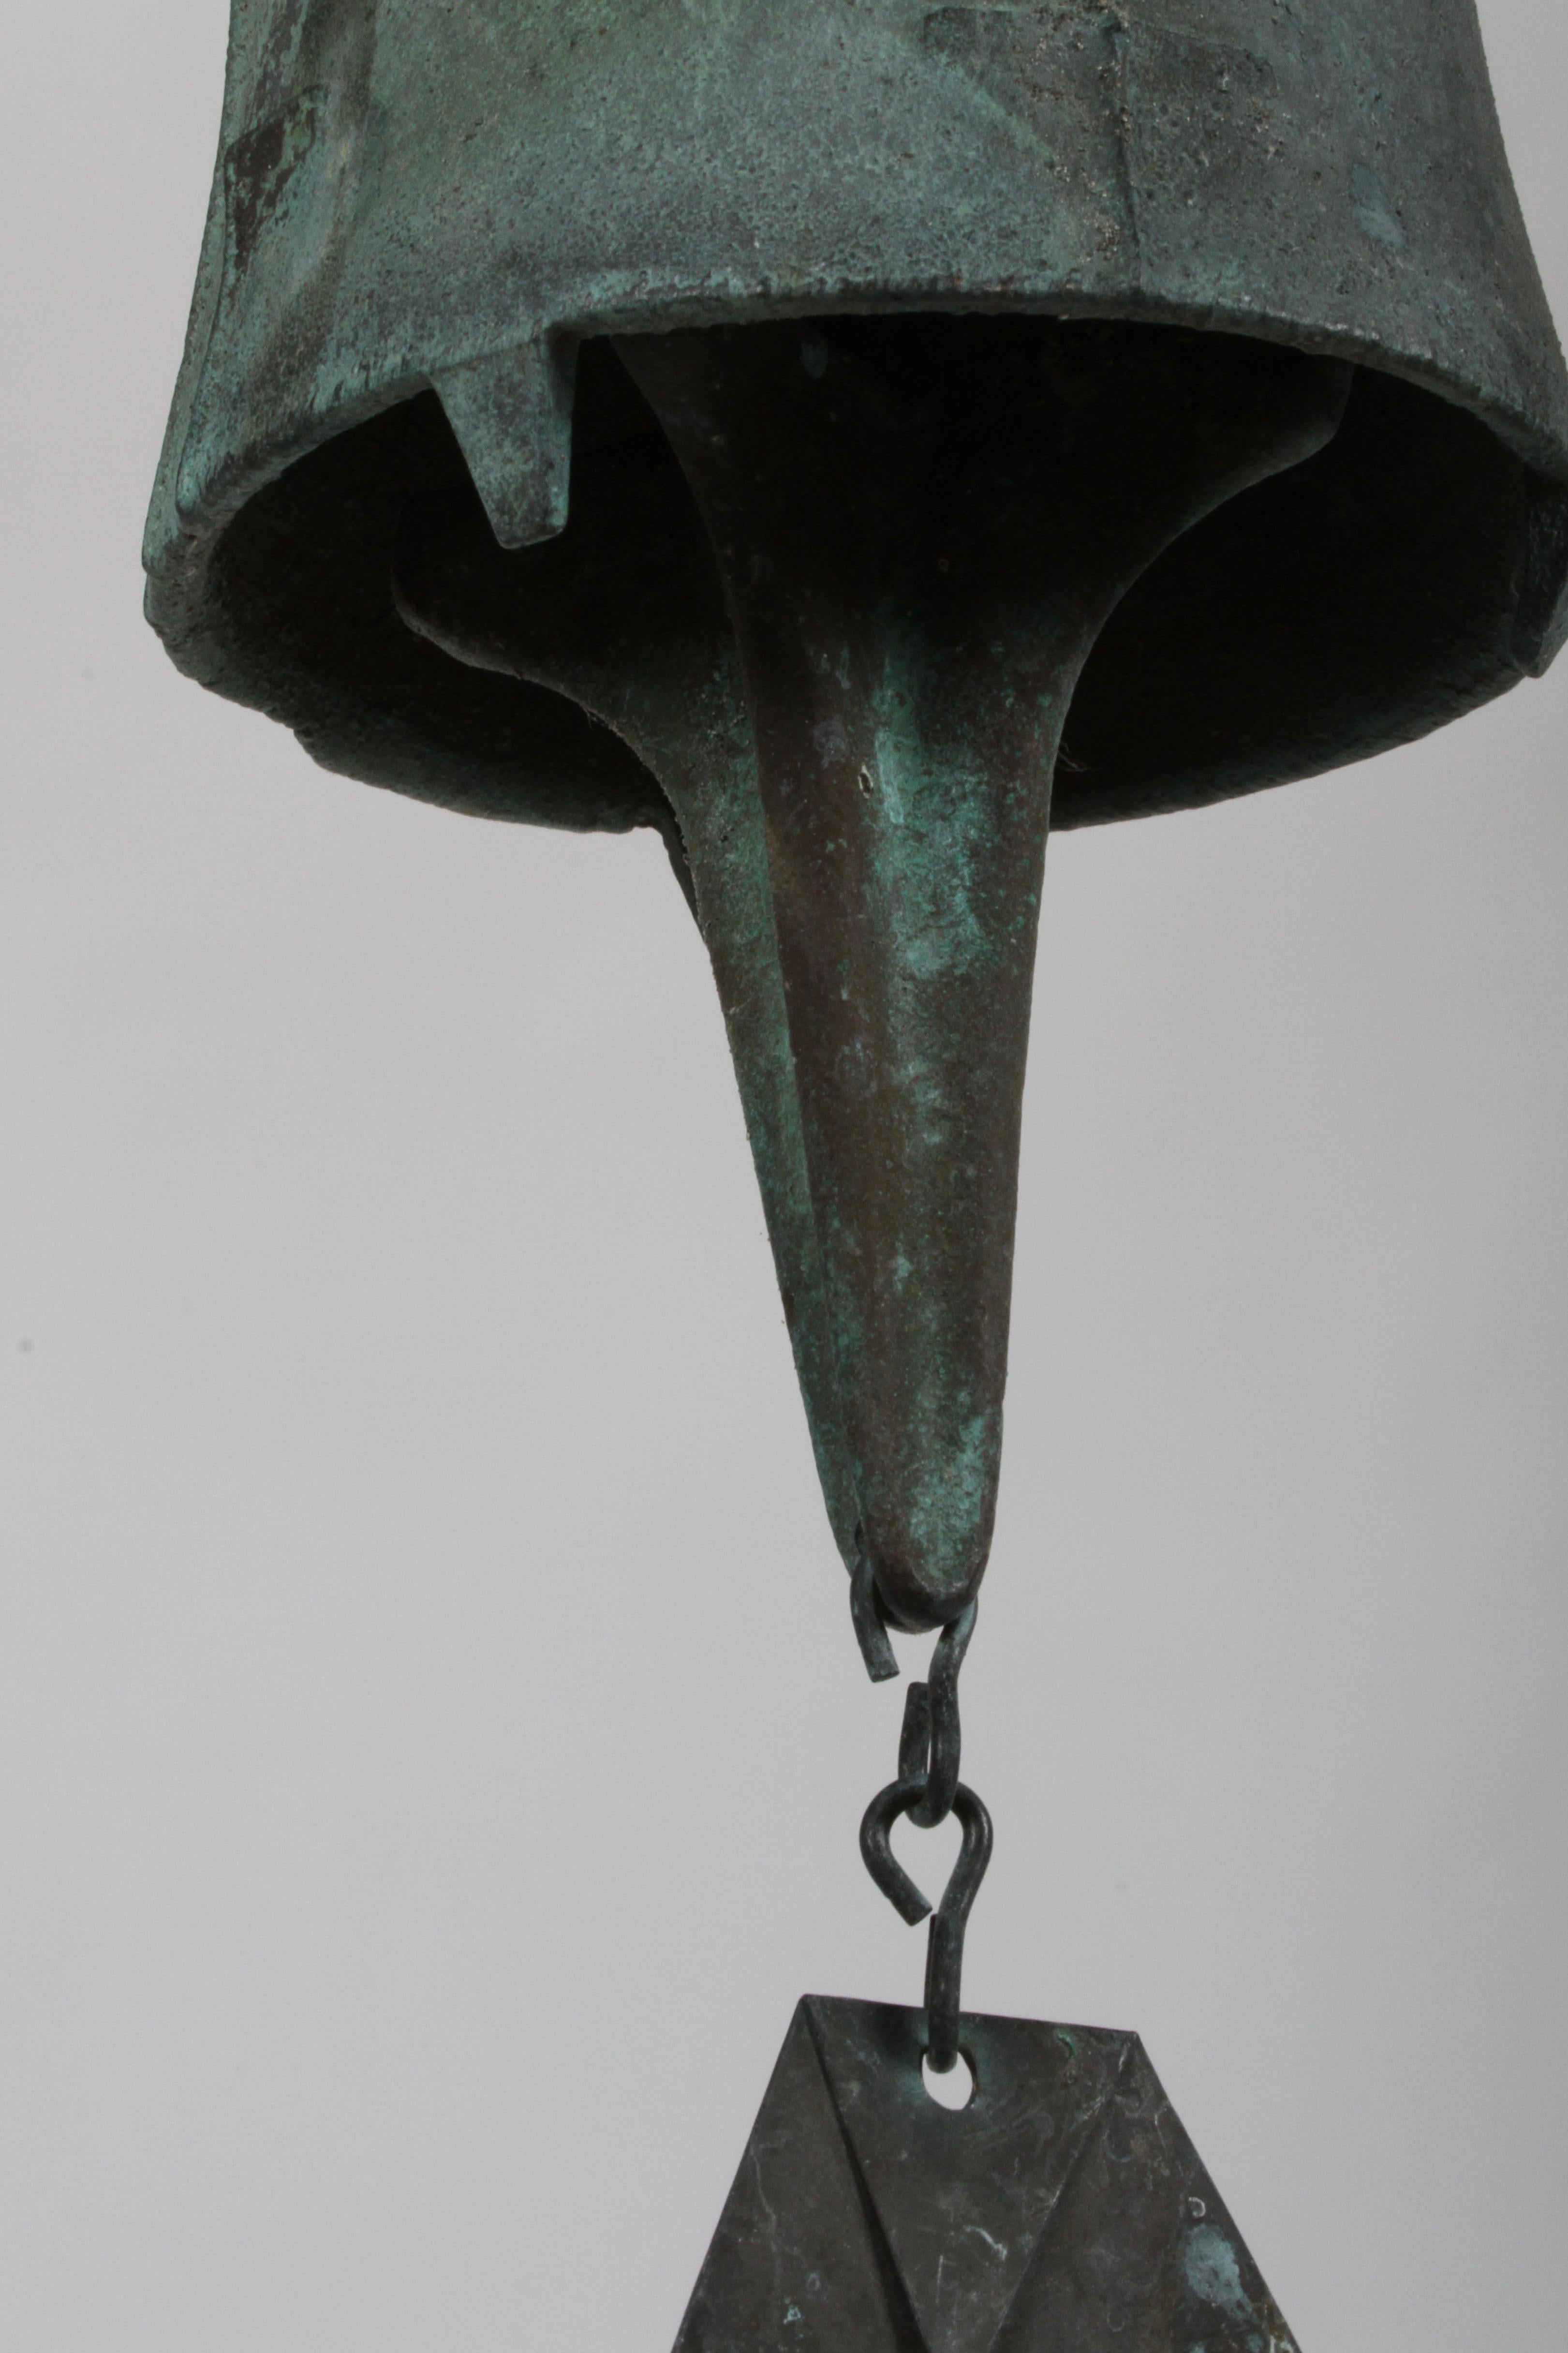 Patinated Early Bronze Sculptural Wind Chime or Bell by Paolo Soleri, Mid-Century Modern